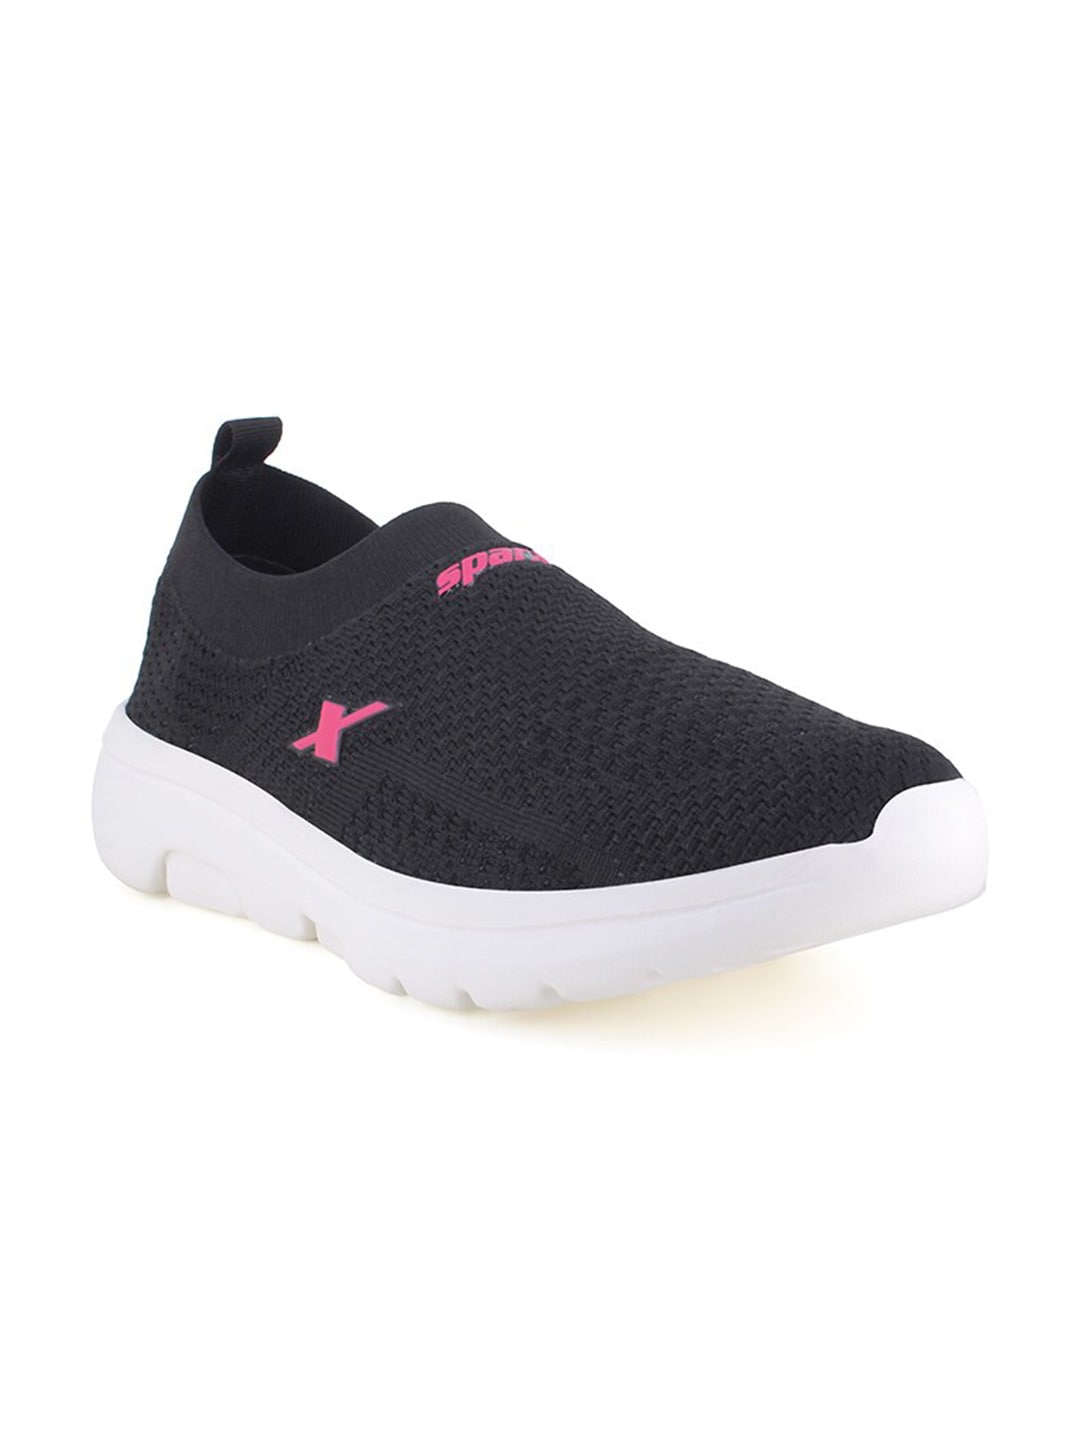 Sparx Women Black Textile Running Non-Marking Shoes Price in India